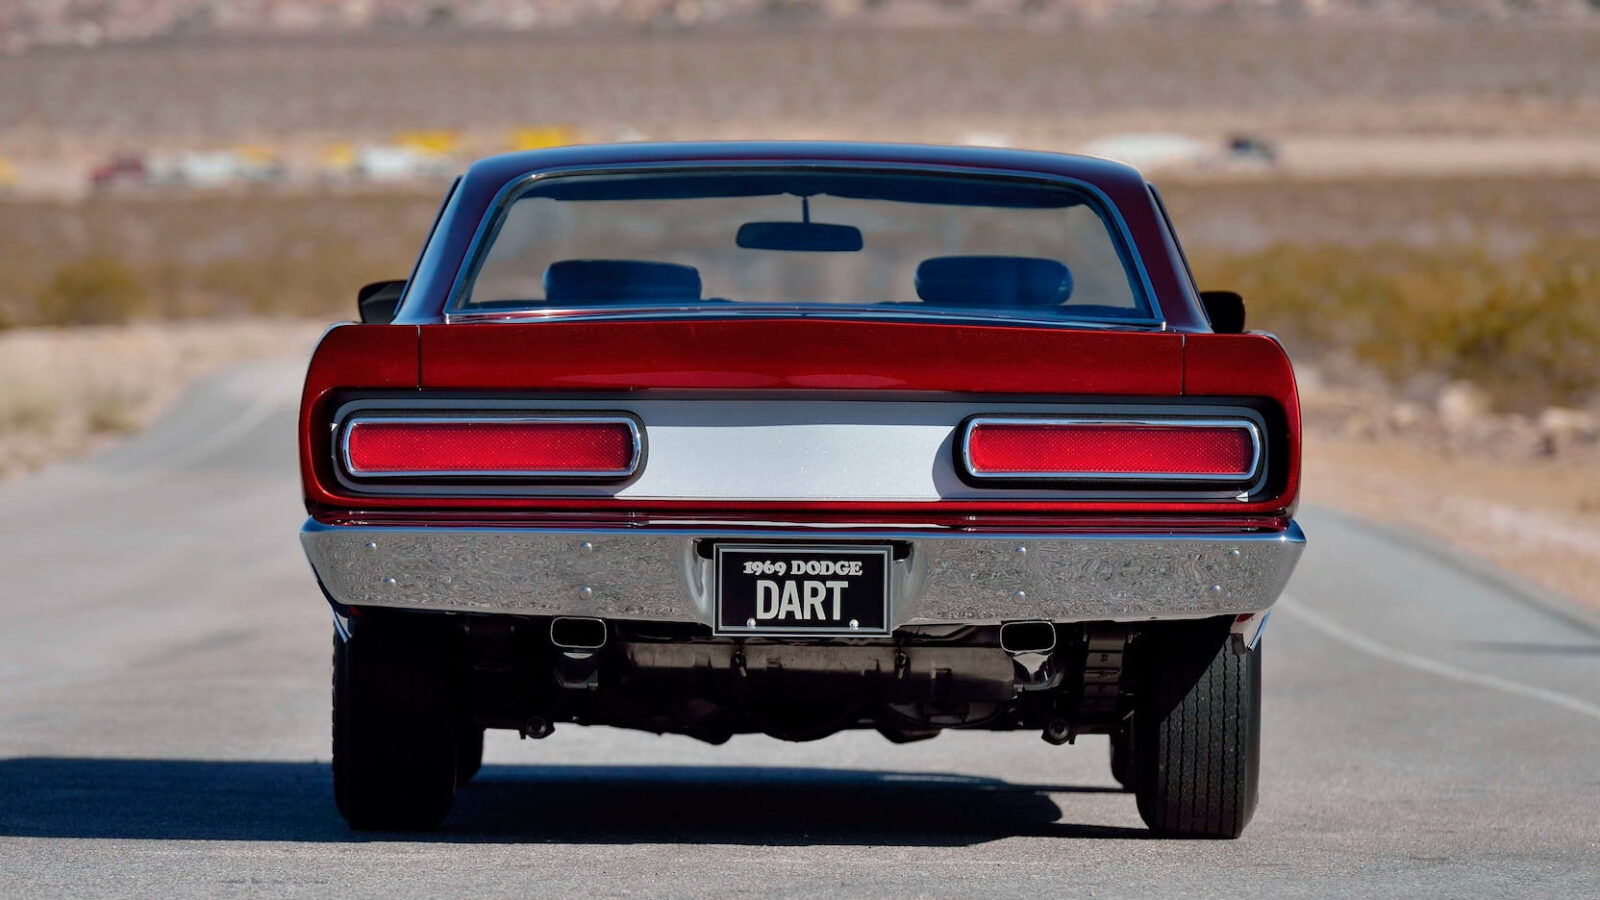 For Sale The Dodge Dart Swinger 340 Concept Car From 1969